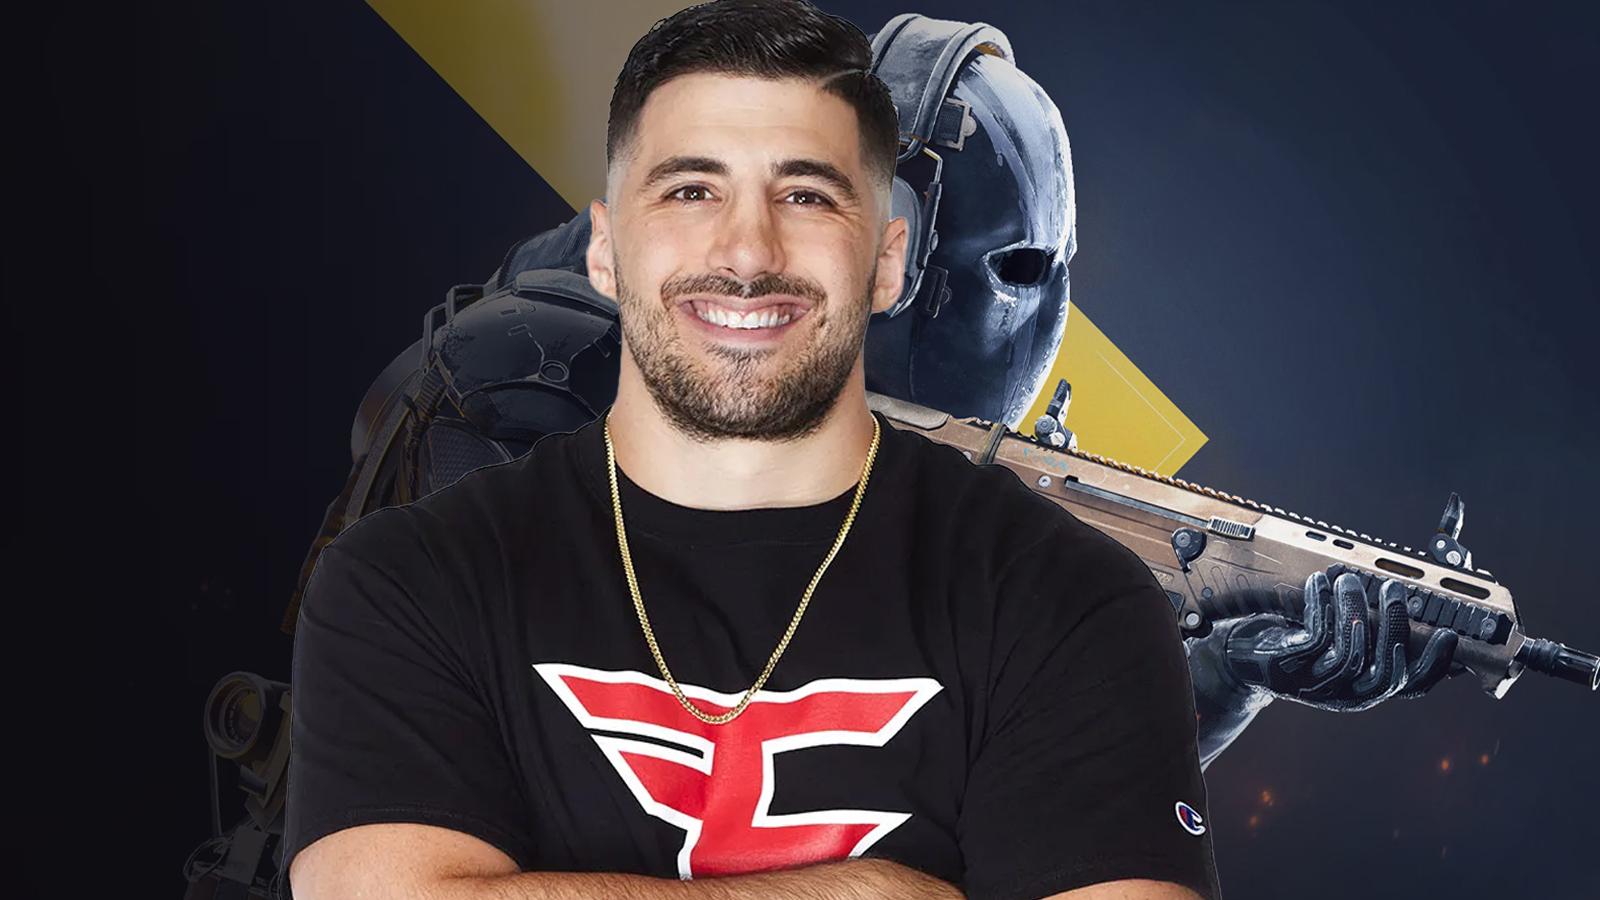 an image of Nickmercs and Xdefiant